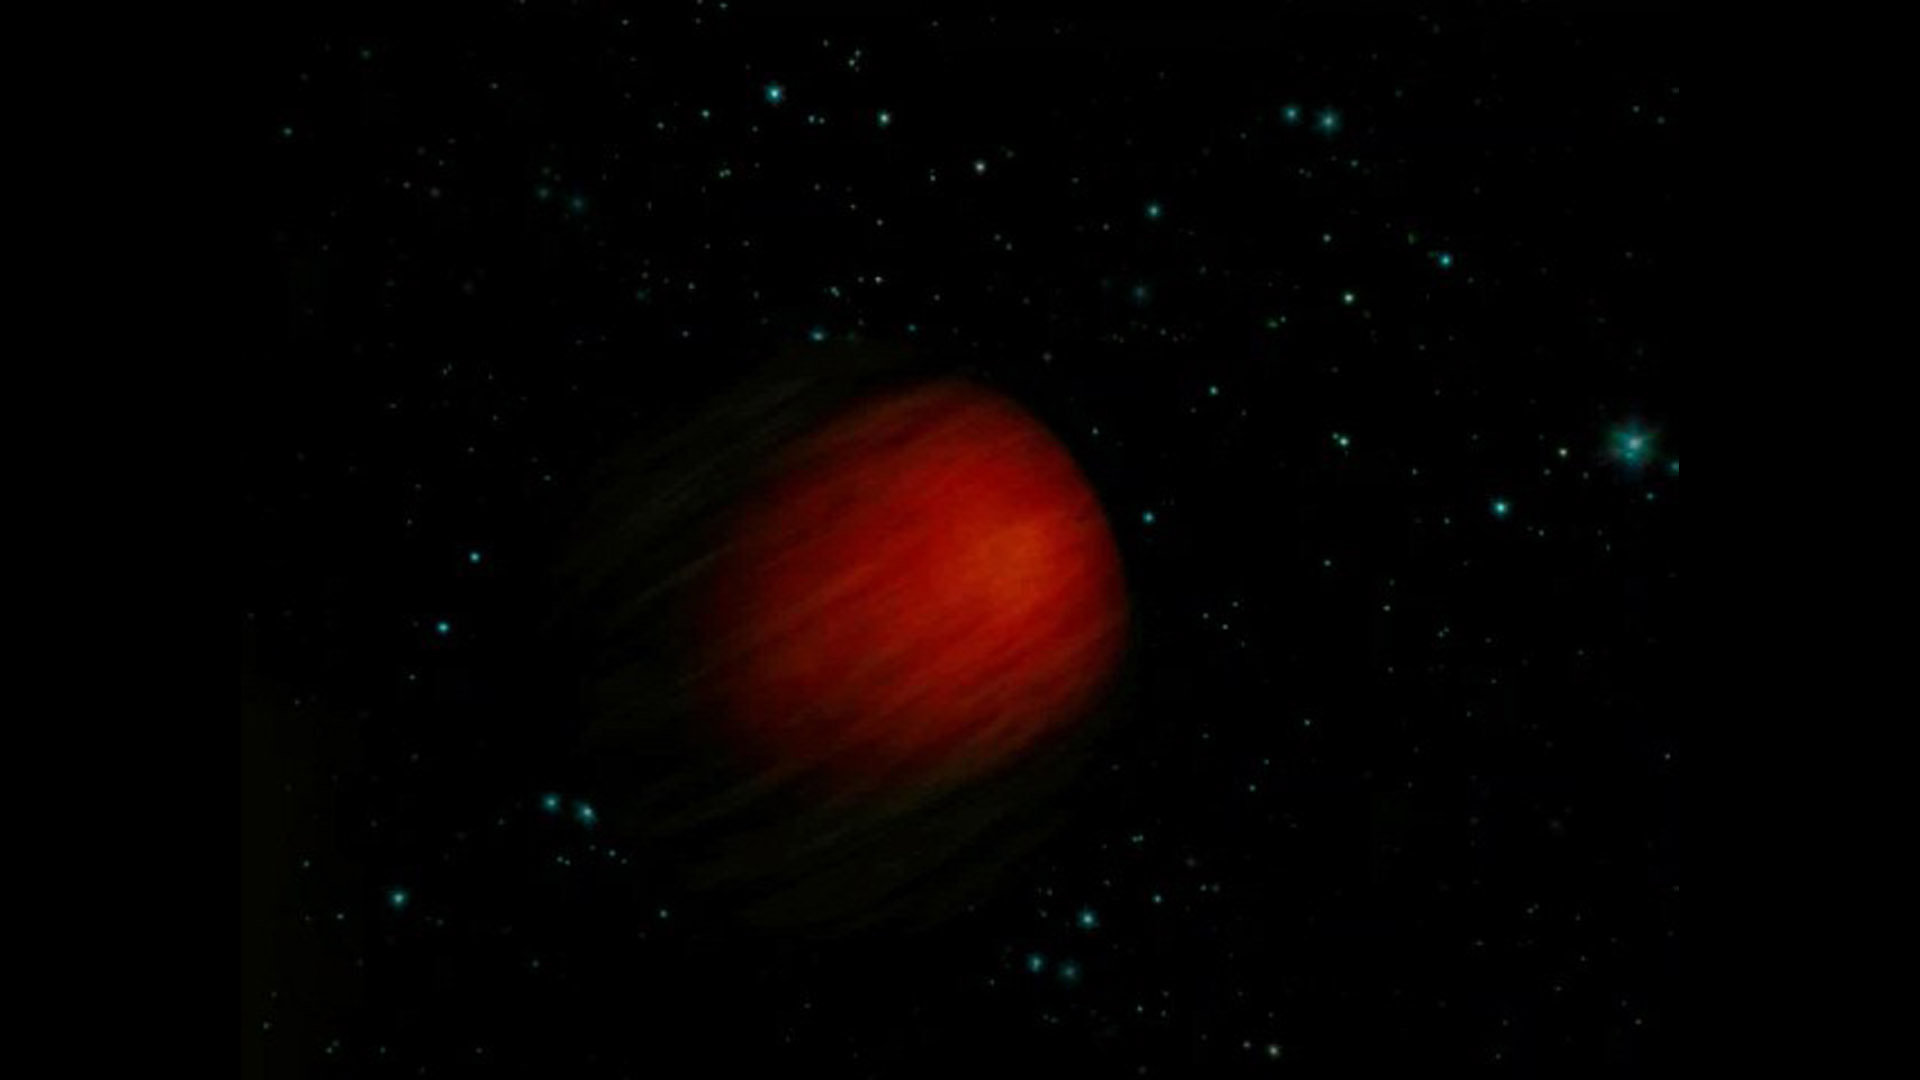 Exoplanet Smertrios is a hot Jupiter exoplanet with an atmosphere that defies expectations.